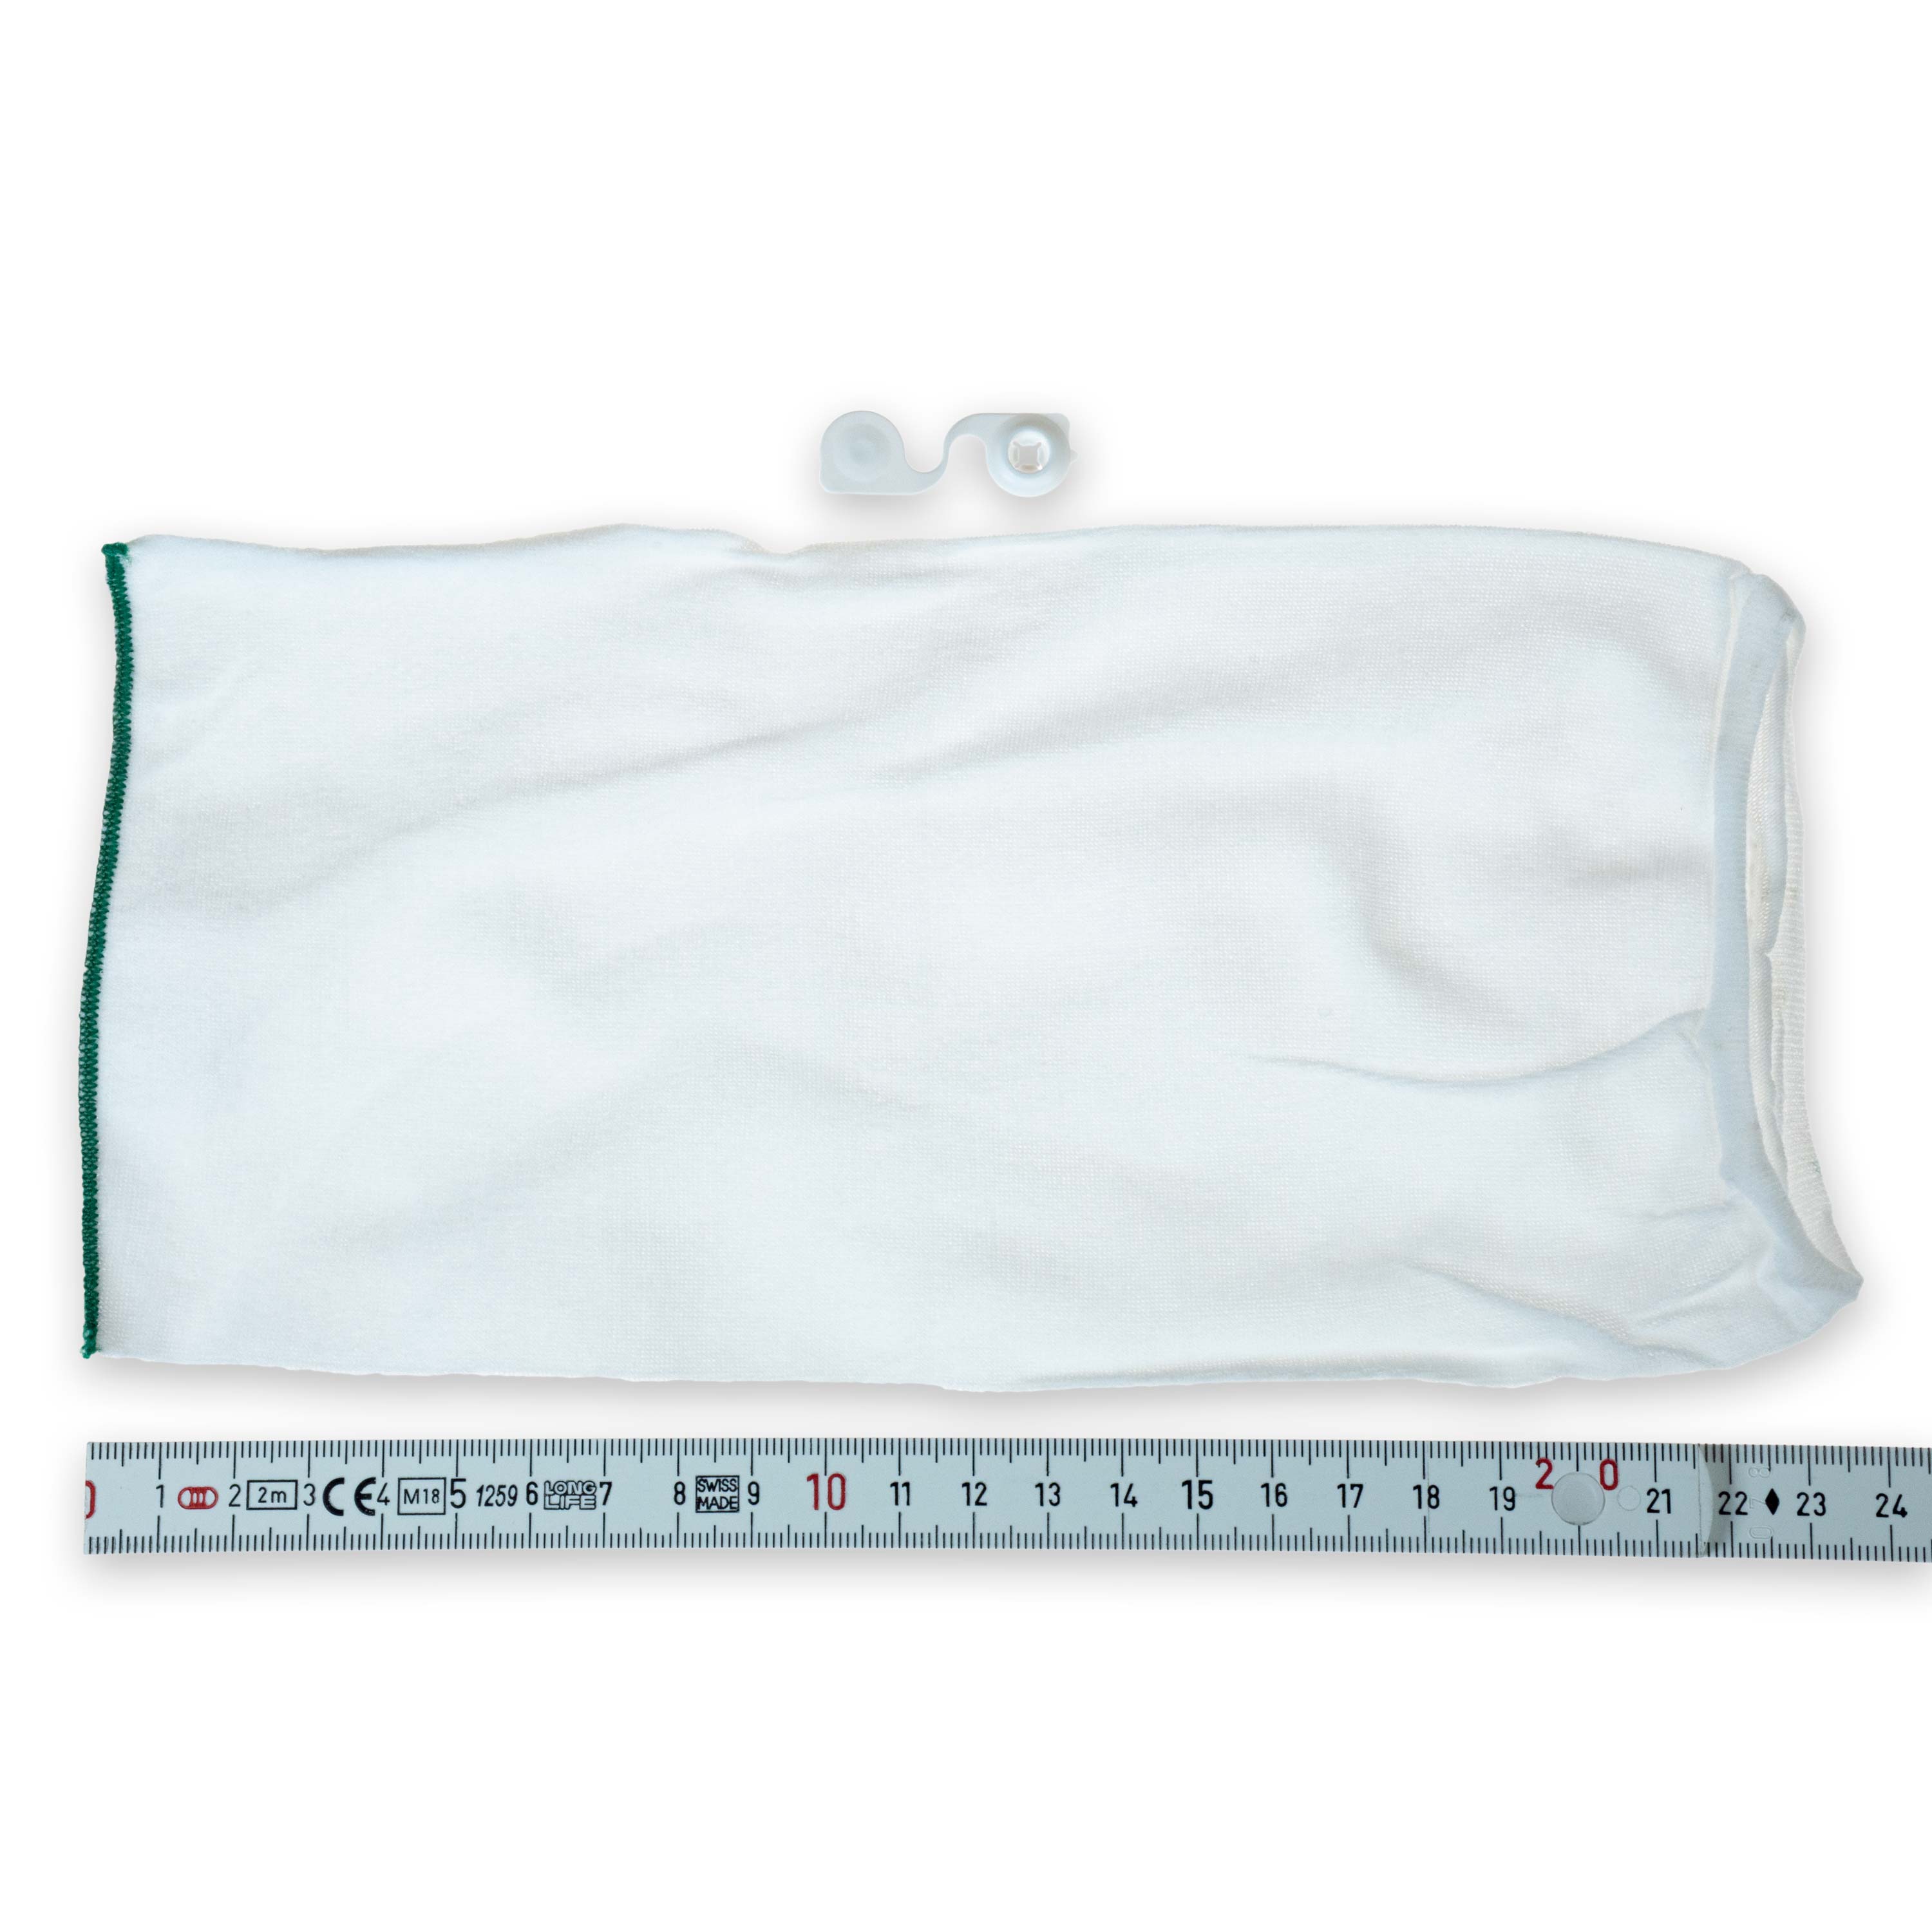 Filter sock white size up from 0.5 l to 2.5 l - extra dense